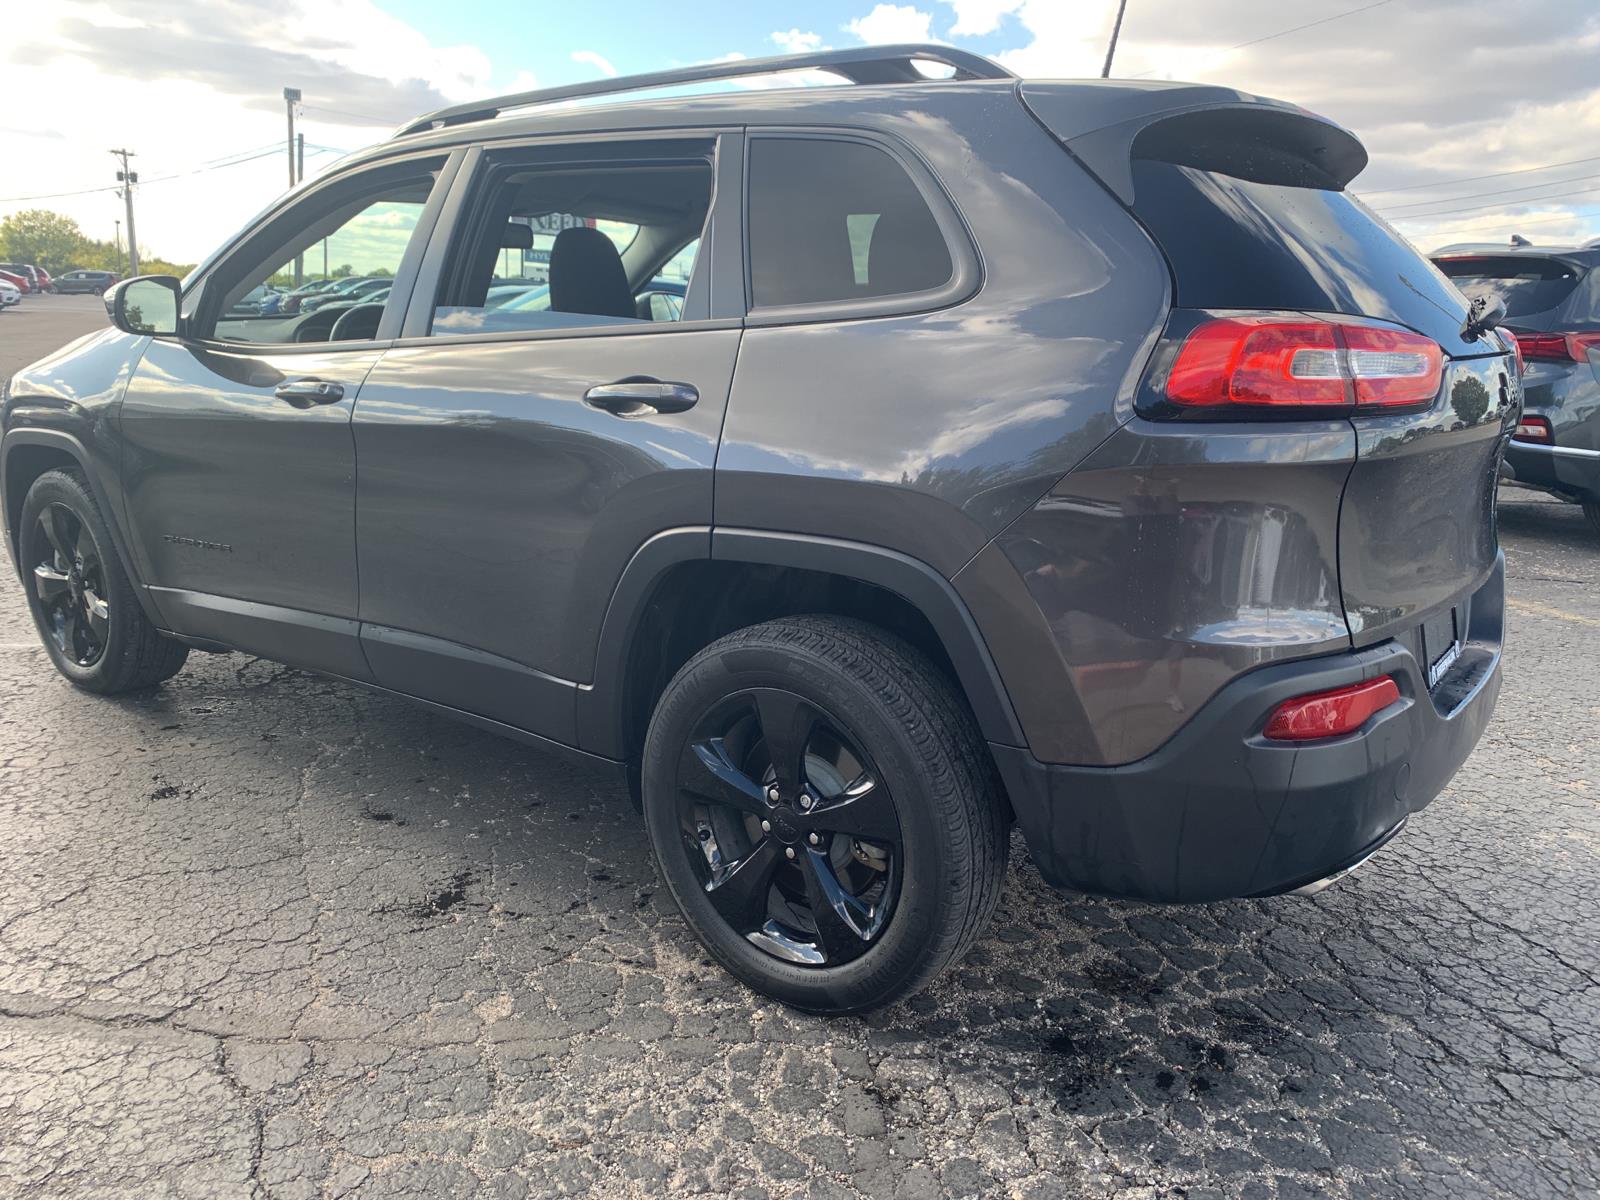 Pre-Owned 2018 Jeep Cherokee Latitude Front Wheel Drive Sport Utility Tire Size For 2018 Jeep Cherokee Latitude